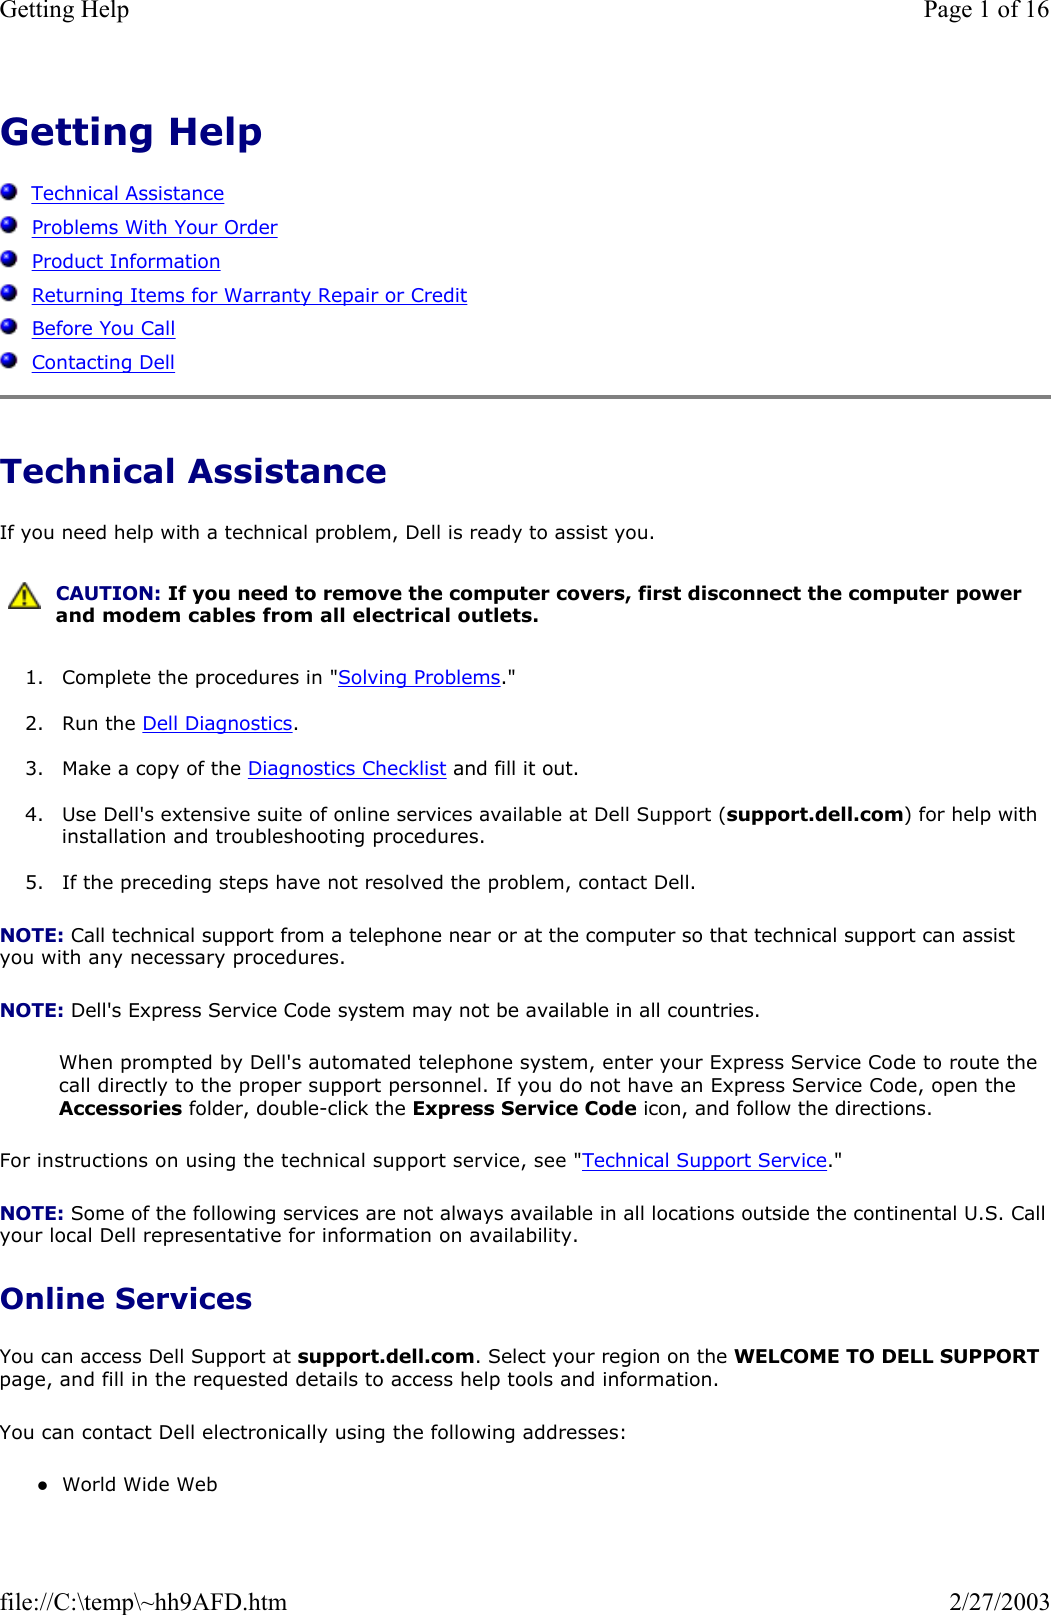 Getting Help      Technical Assistance   Problems With Your Order   Product Information   Returning Items for Warranty Repair or Credit   Before You Call   Contacting Dell Technical Assistance If you need help with a technical problem, Dell is ready to assist you. 1. Complete the procedures in &quot;Solving Problems.&quot;  2. Run the Dell Diagnostics.  3. Make a copy of the Diagnostics Checklist and fill it out.  4. Use Dell&apos;s extensive suite of online services available at Dell Support (support.dell.com) for help with installation and troubleshooting procedures.  5. If the preceding steps have not resolved the problem, contact Dell.  NOTE: Call technical support from a telephone near or at the computer so that technical support can assist you with any necessary procedures. NOTE: Dell&apos;s Express Service Code system may not be available in all countries. When prompted by Dell&apos;s automated telephone system, enter your Express Service Code to route the call directly to the proper support personnel. If you do not have an Express Service Code, open the Accessories folder, double-click the Express Service Code icon, and follow the directions. For instructions on using the technical support service, see &quot;Technical Support Service.&quot; NOTE: Some of the following services are not always available in all locations outside the continental U.S. Call your local Dell representative for information on availability. Online Services You can access Dell Support at support.dell.com. Select your region on the WELCOME TO DELL SUPPORT page, and fill in the requested details to access help tools and information.  You can contact Dell electronically using the following addresses: zWorld Wide Web  CAUTION: If you need to remove the computer covers, first disconnect the computer power and modem cables from all electrical outlets.Page 1 of 16Getting Help2/27/2003file://C:\temp\~hh9AFD.htm